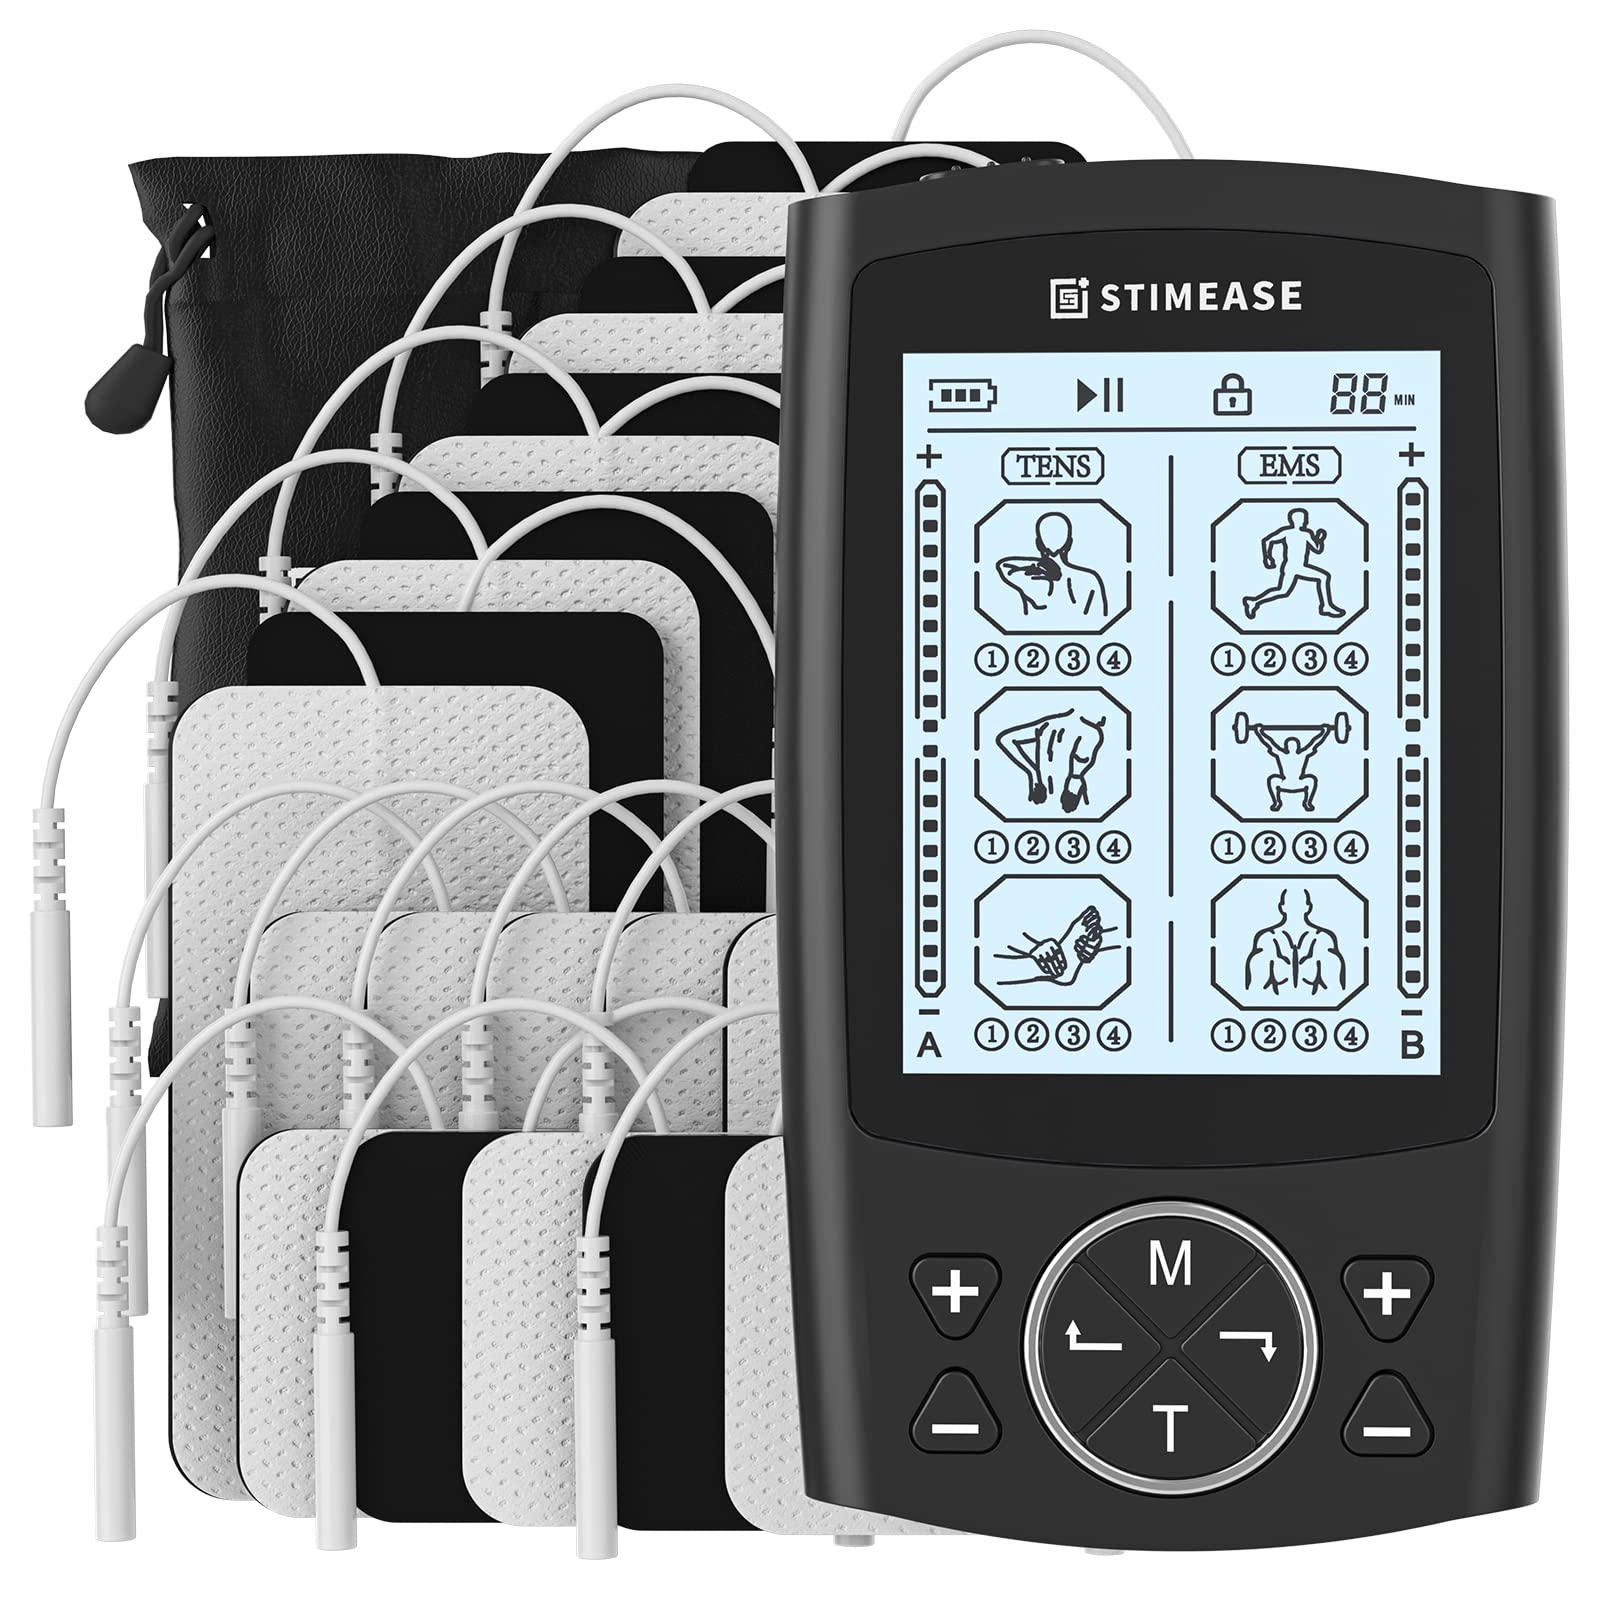  TENS Unit Muscle Stimulator Electric Shock Therapy for Muscles  Dual Channel TENS EMS Unit Electronic Pulse Massager with 24 Modes Physical  Therapy Equipment for Back Pain Relief : Health & Household